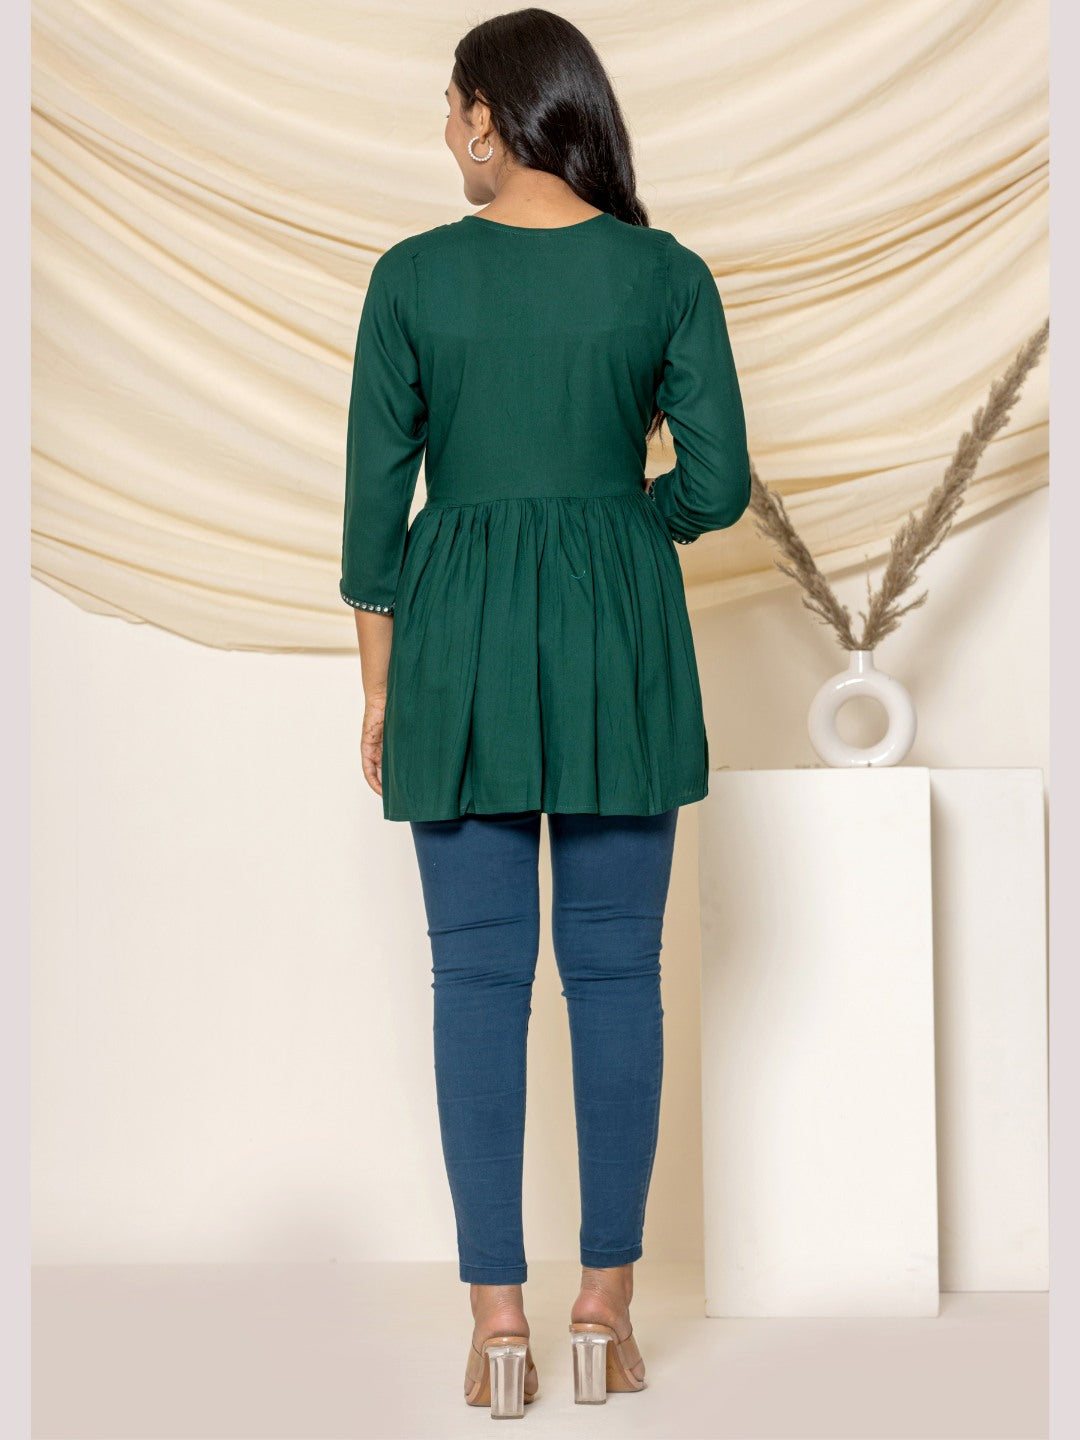 Solid Embroidered Peplum Top - Bottle Green